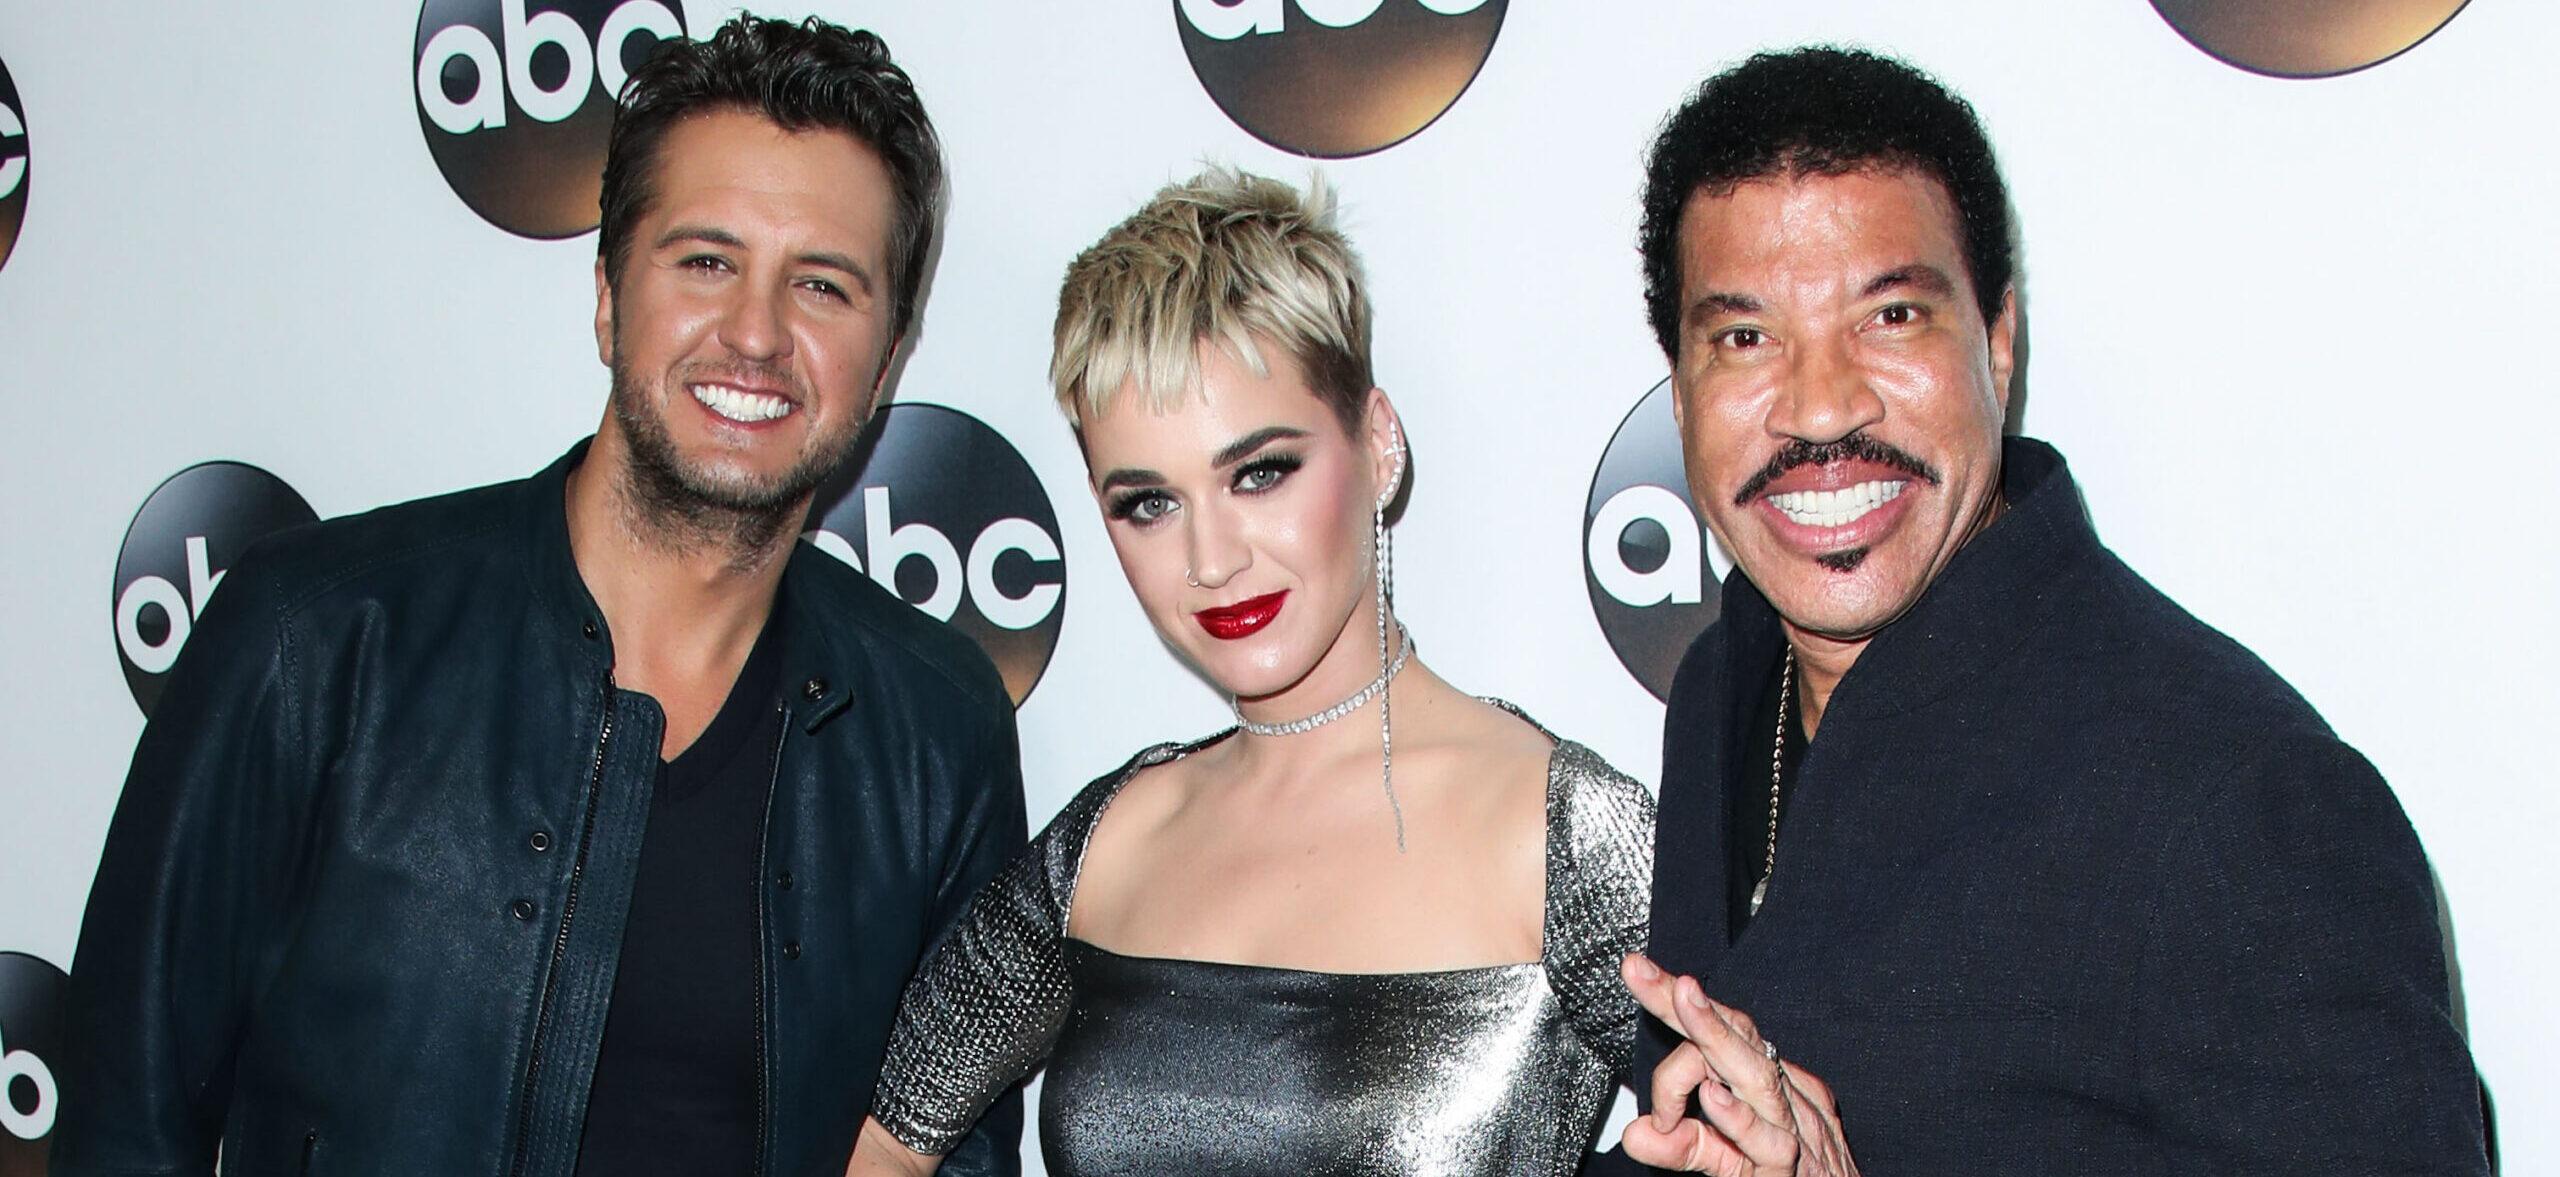 Luke Bryan Stands Up For Katy Perry Over ‘American Idol’ Judging Backlash